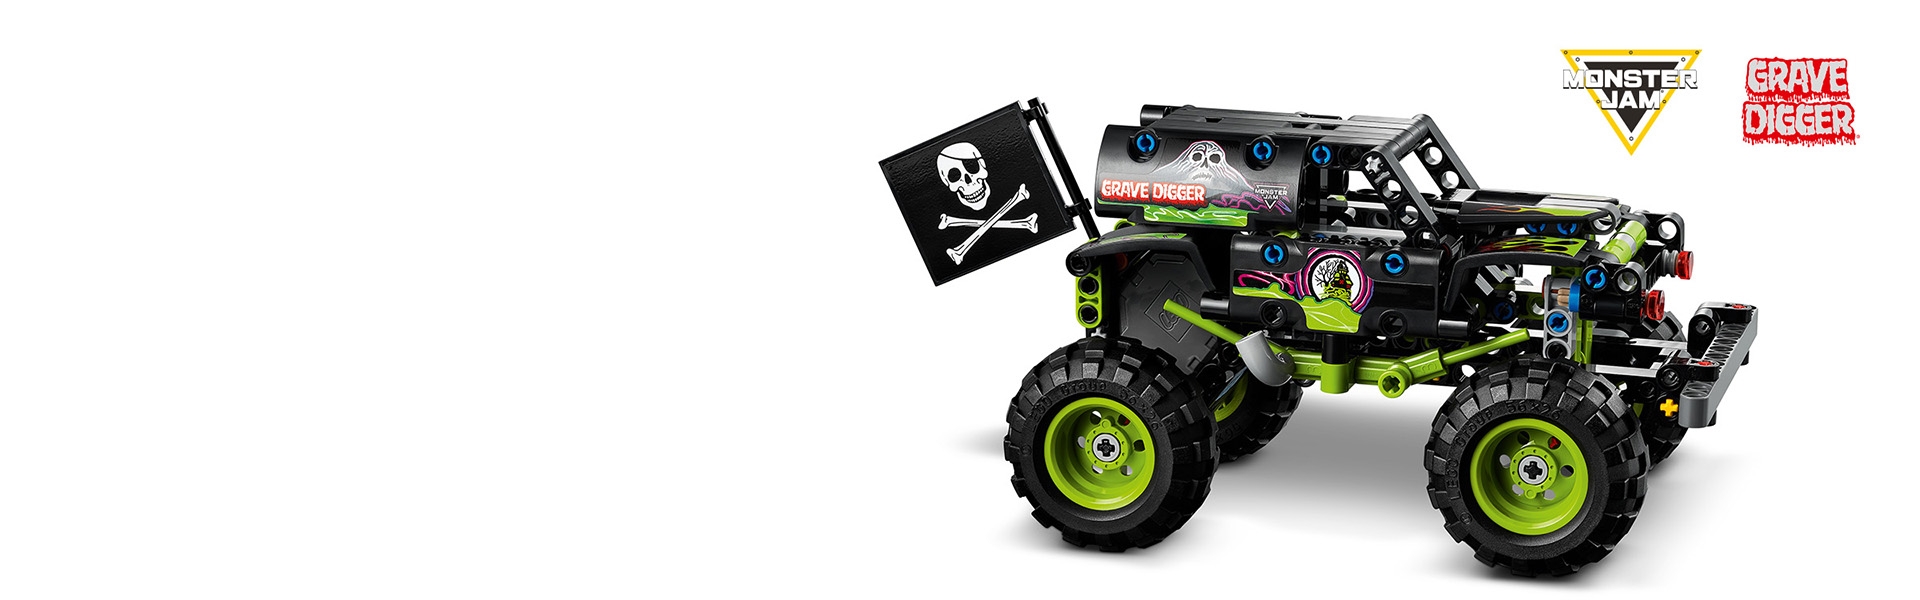 double digger power wheels for ages 3 and up